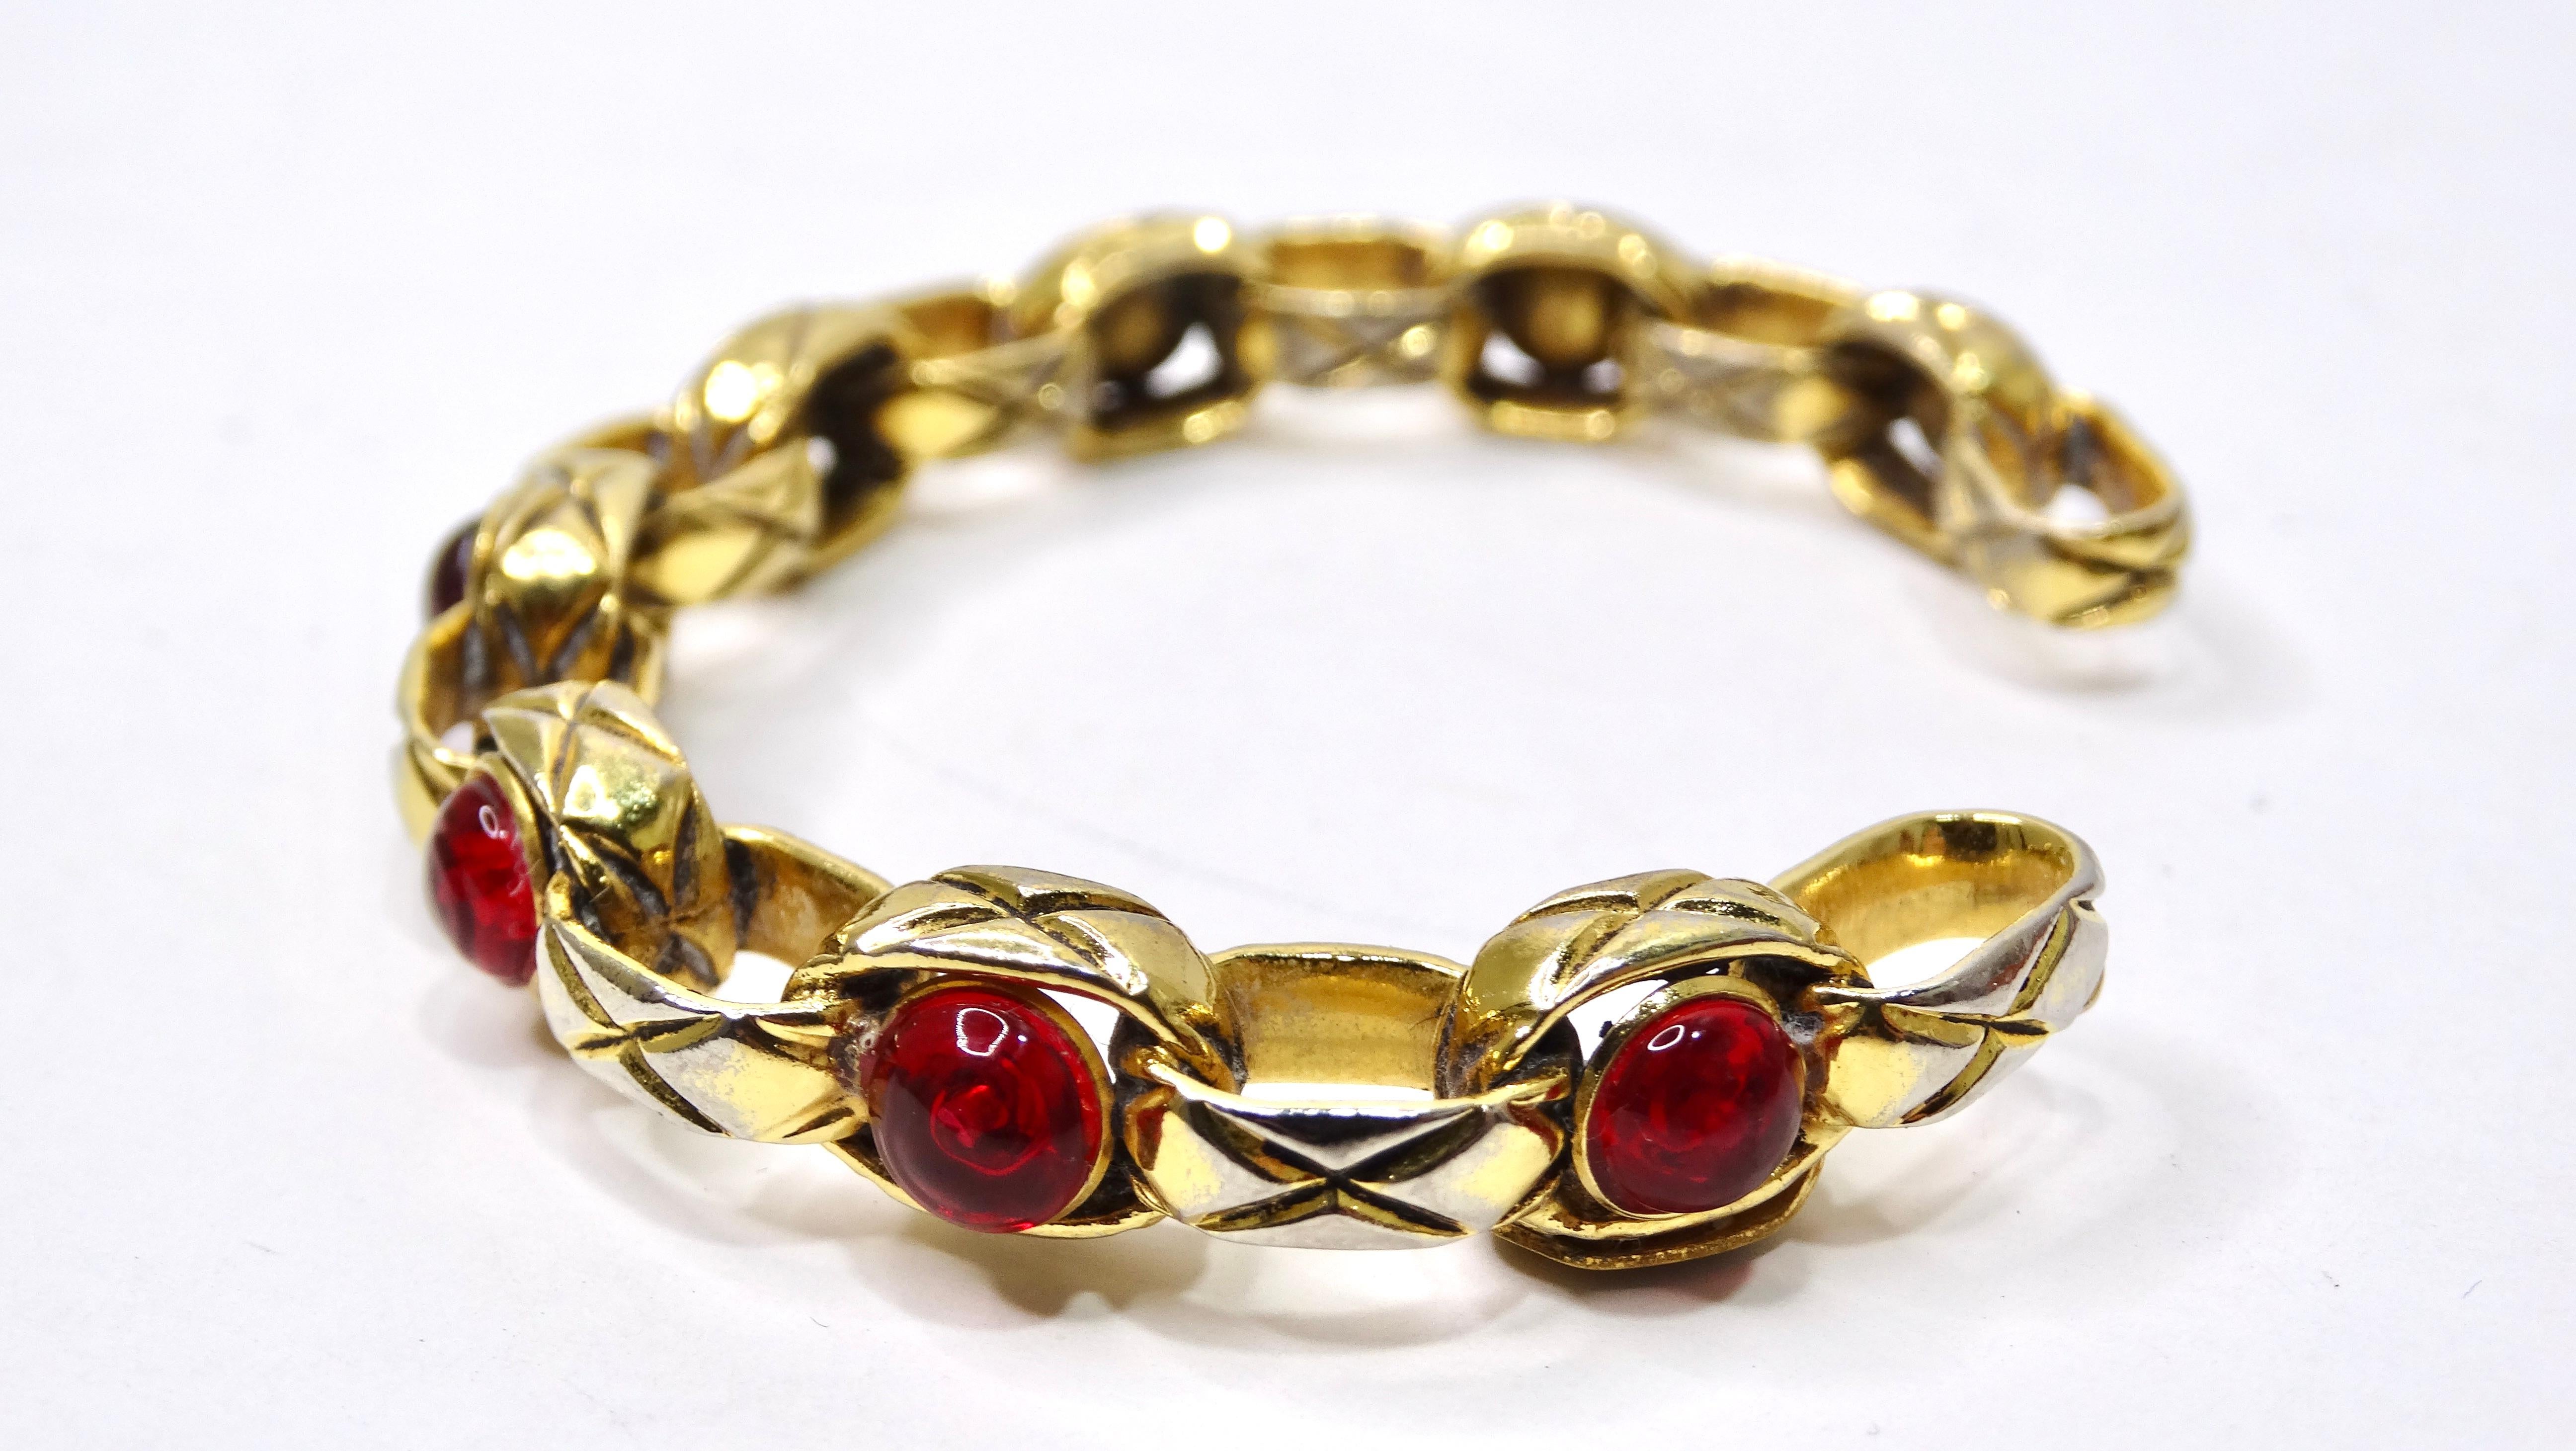 This is a beautifully crafted Chanel cuff with great embellishments! It doesn't get better than this chain-link motif bracelet. It is adorned with red stones and has intricate engraving throughout. Pair this bracelet with some Yves Saint Laurent